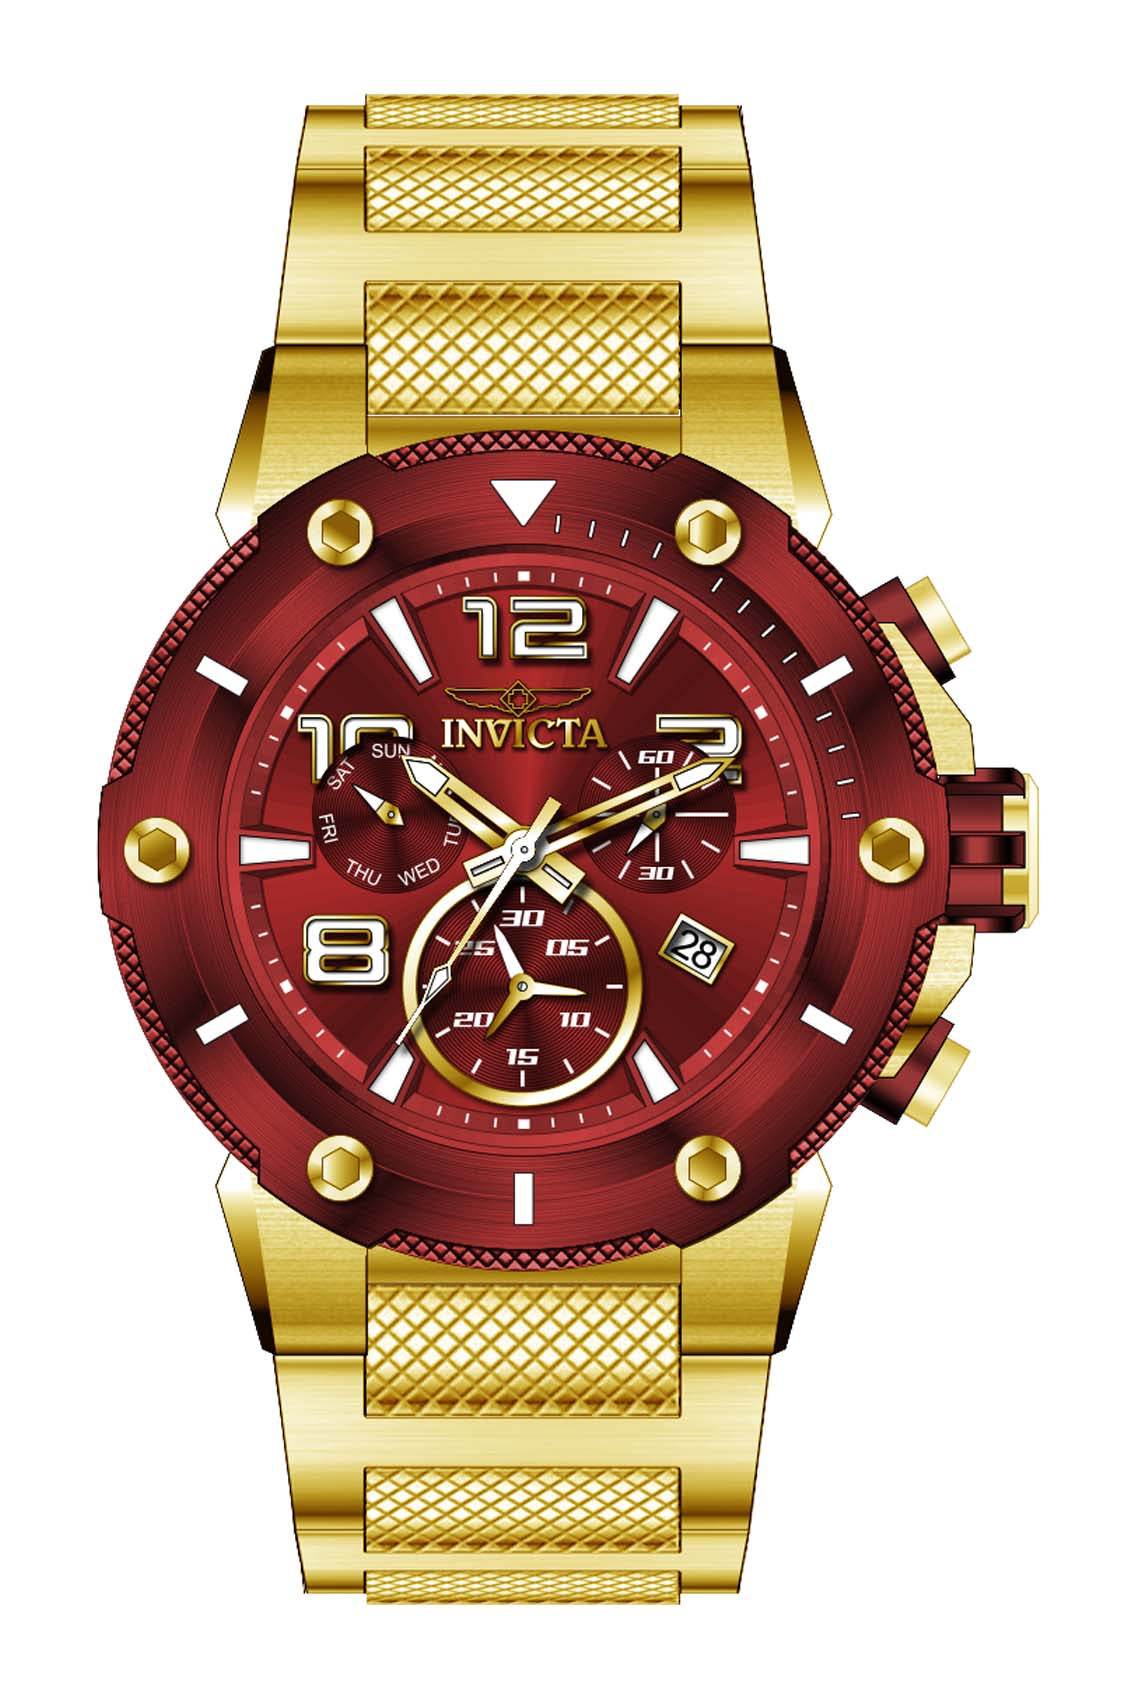 Band for Invicta Speedway Men 40237